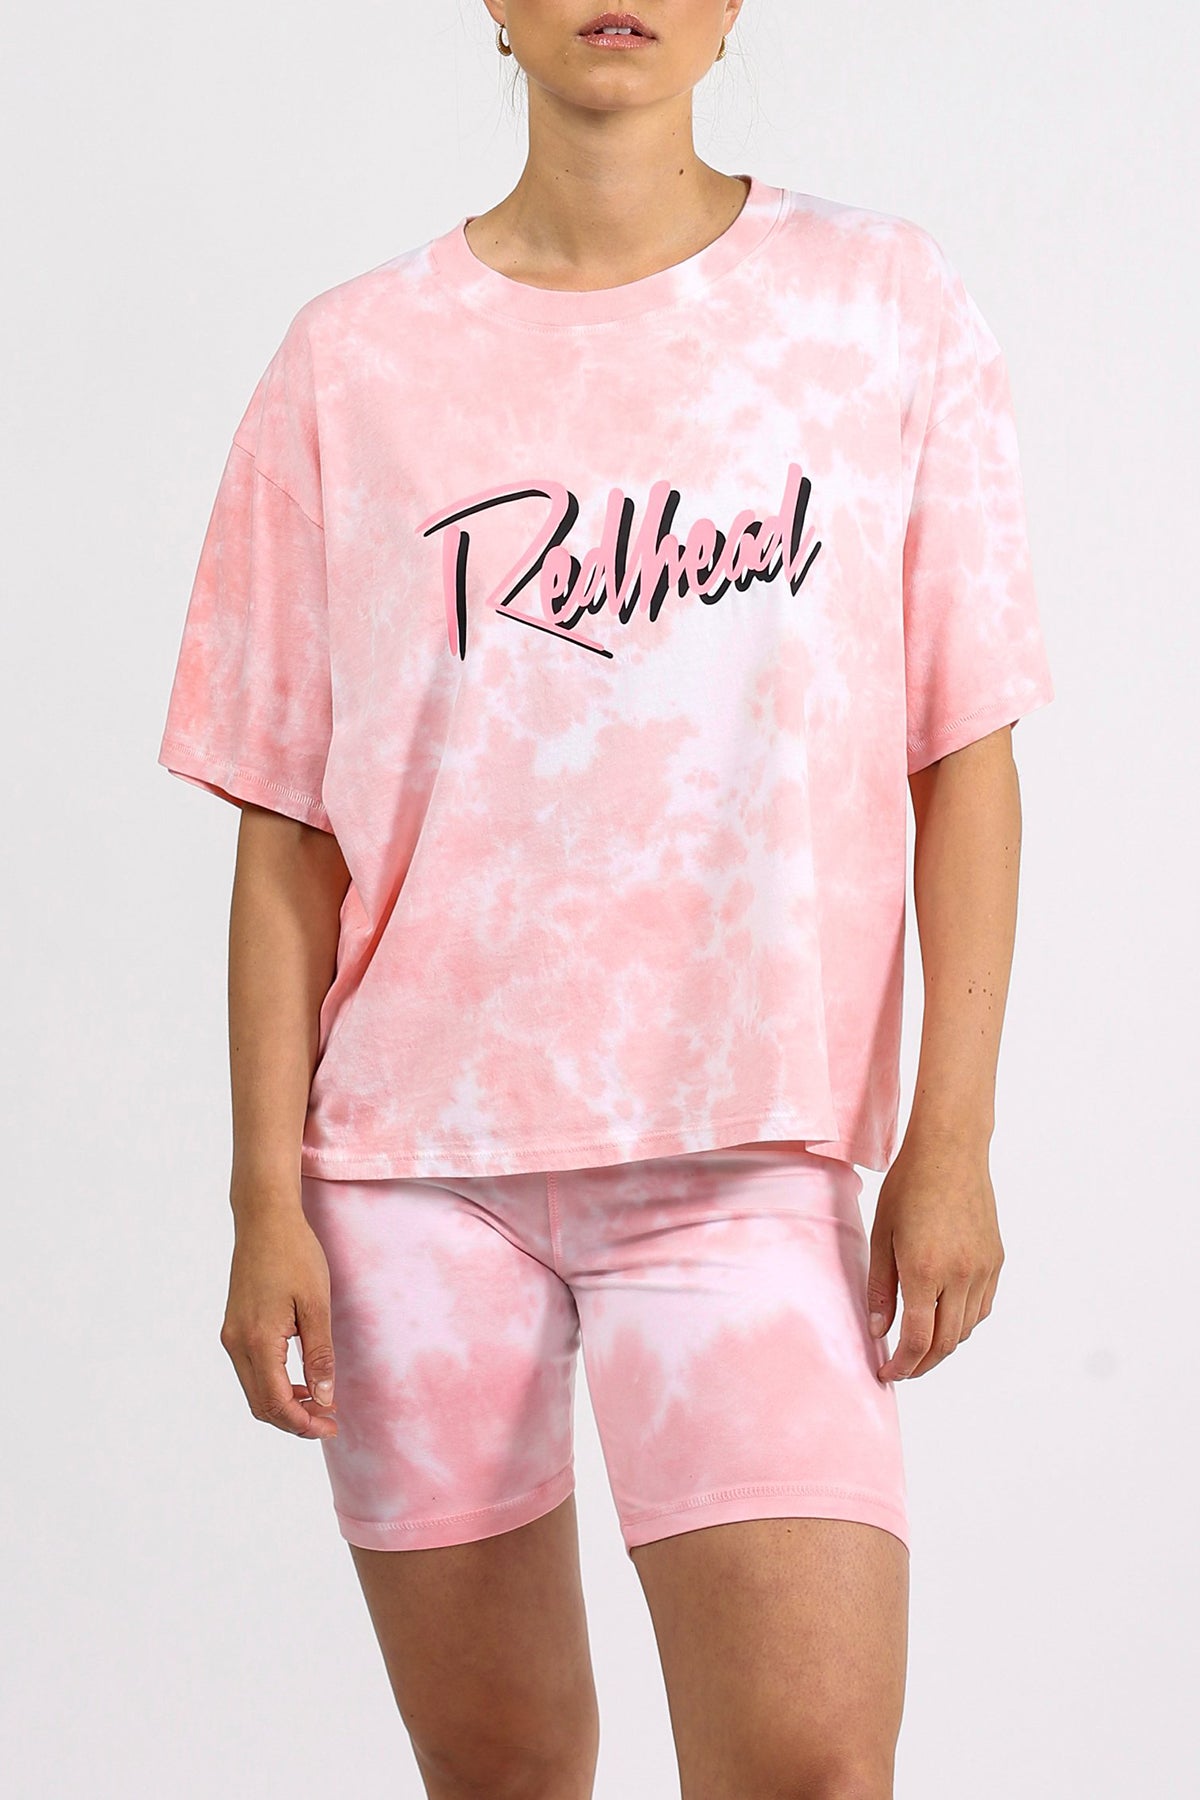 The "REDHEAD" Pink Marble Tie-Dye Boxy Tee